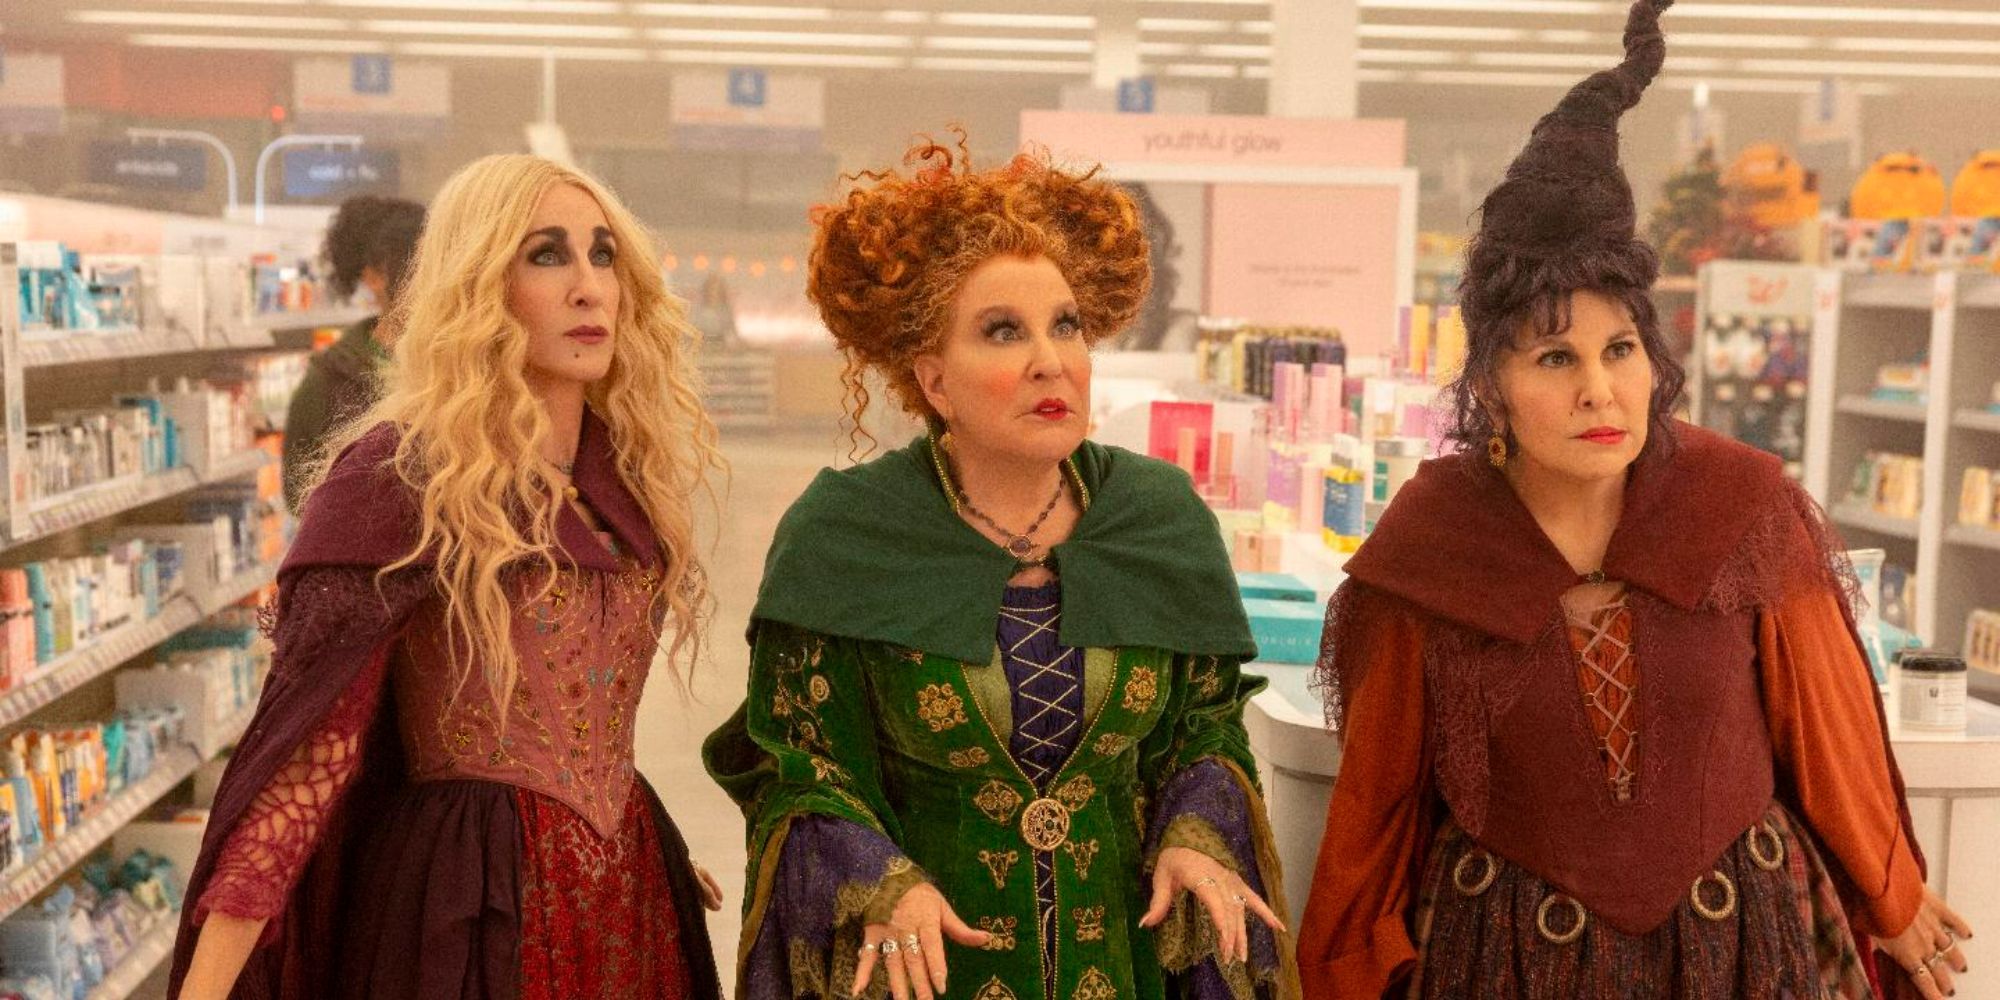 The Sanderson sisters at a Walgreens in Hocus Pocus 2